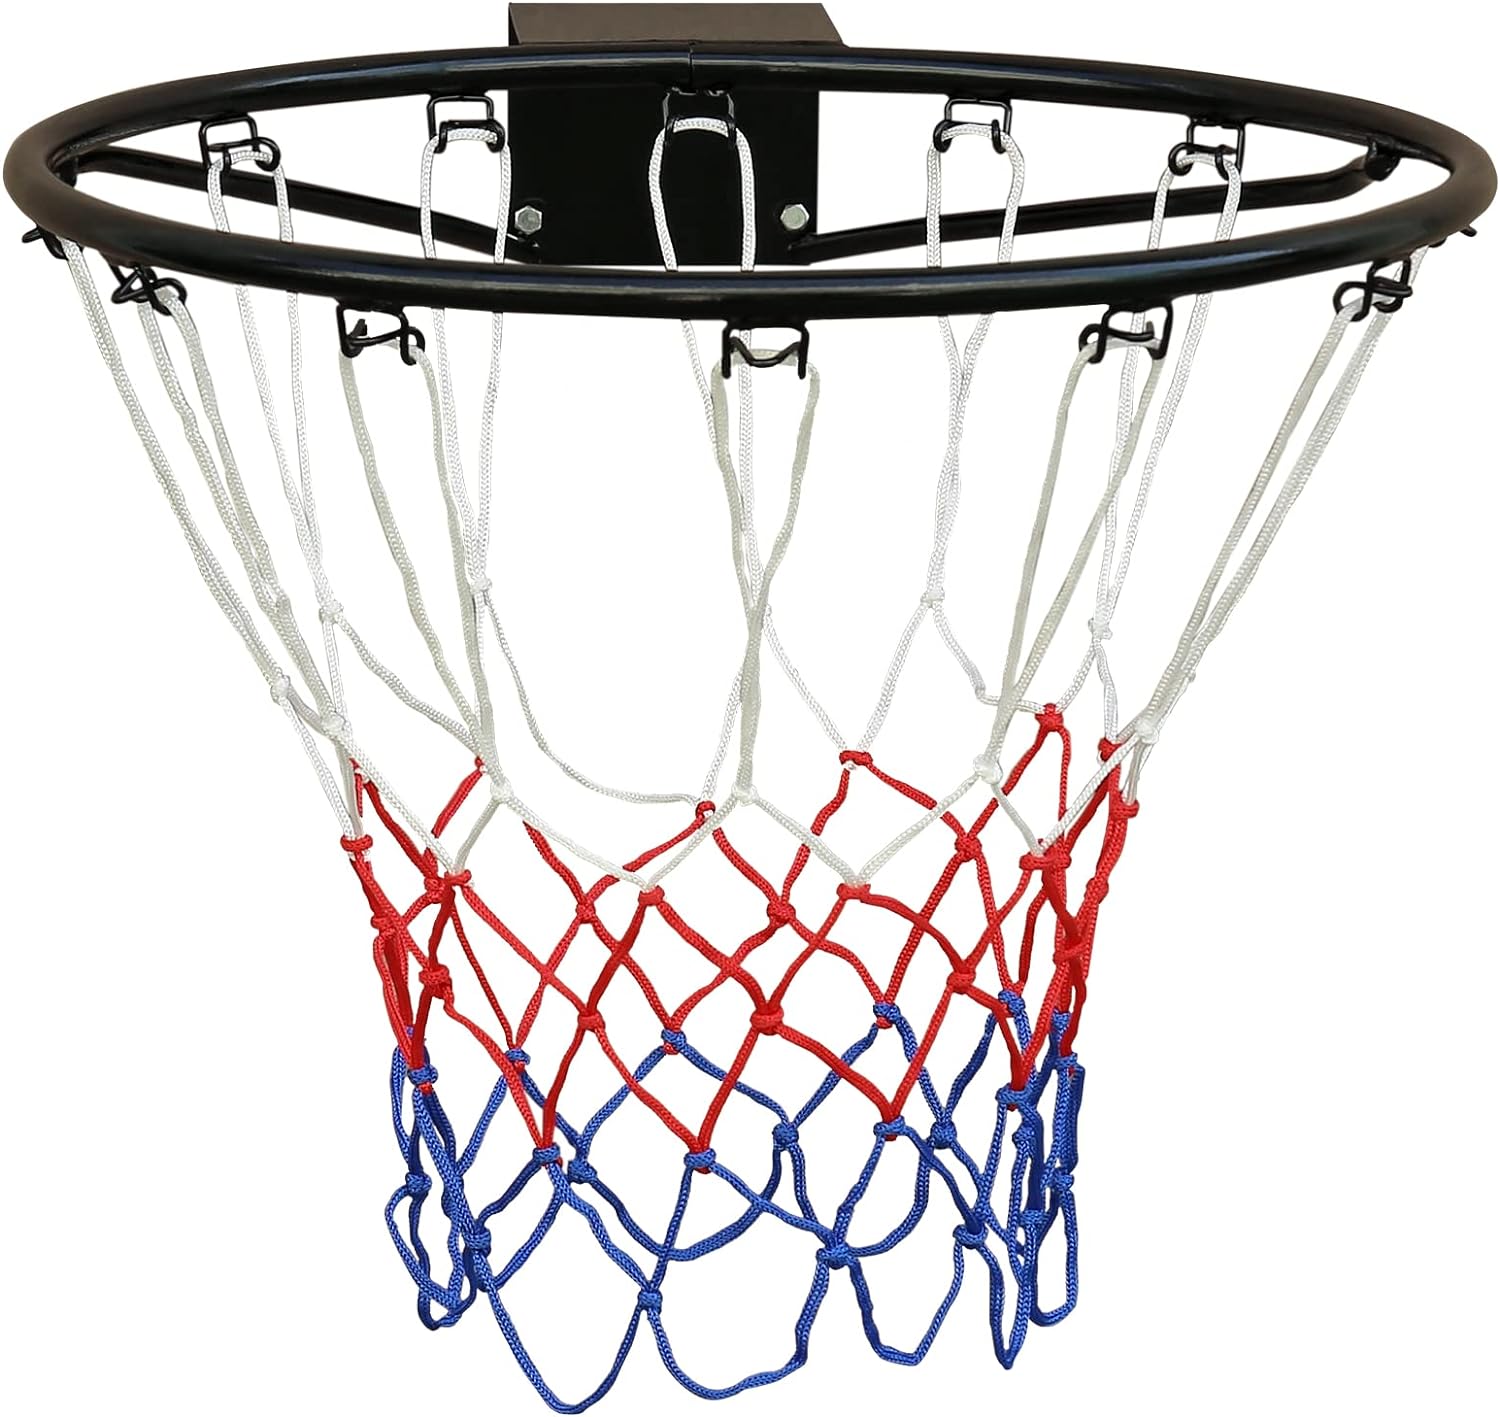 AOKUNG Basketball Solid Rim, Basketball Net, Indoor Outdoor Hanging Basketball Goal with All Weather Net Wall Mounted Basketball Hoop 18''